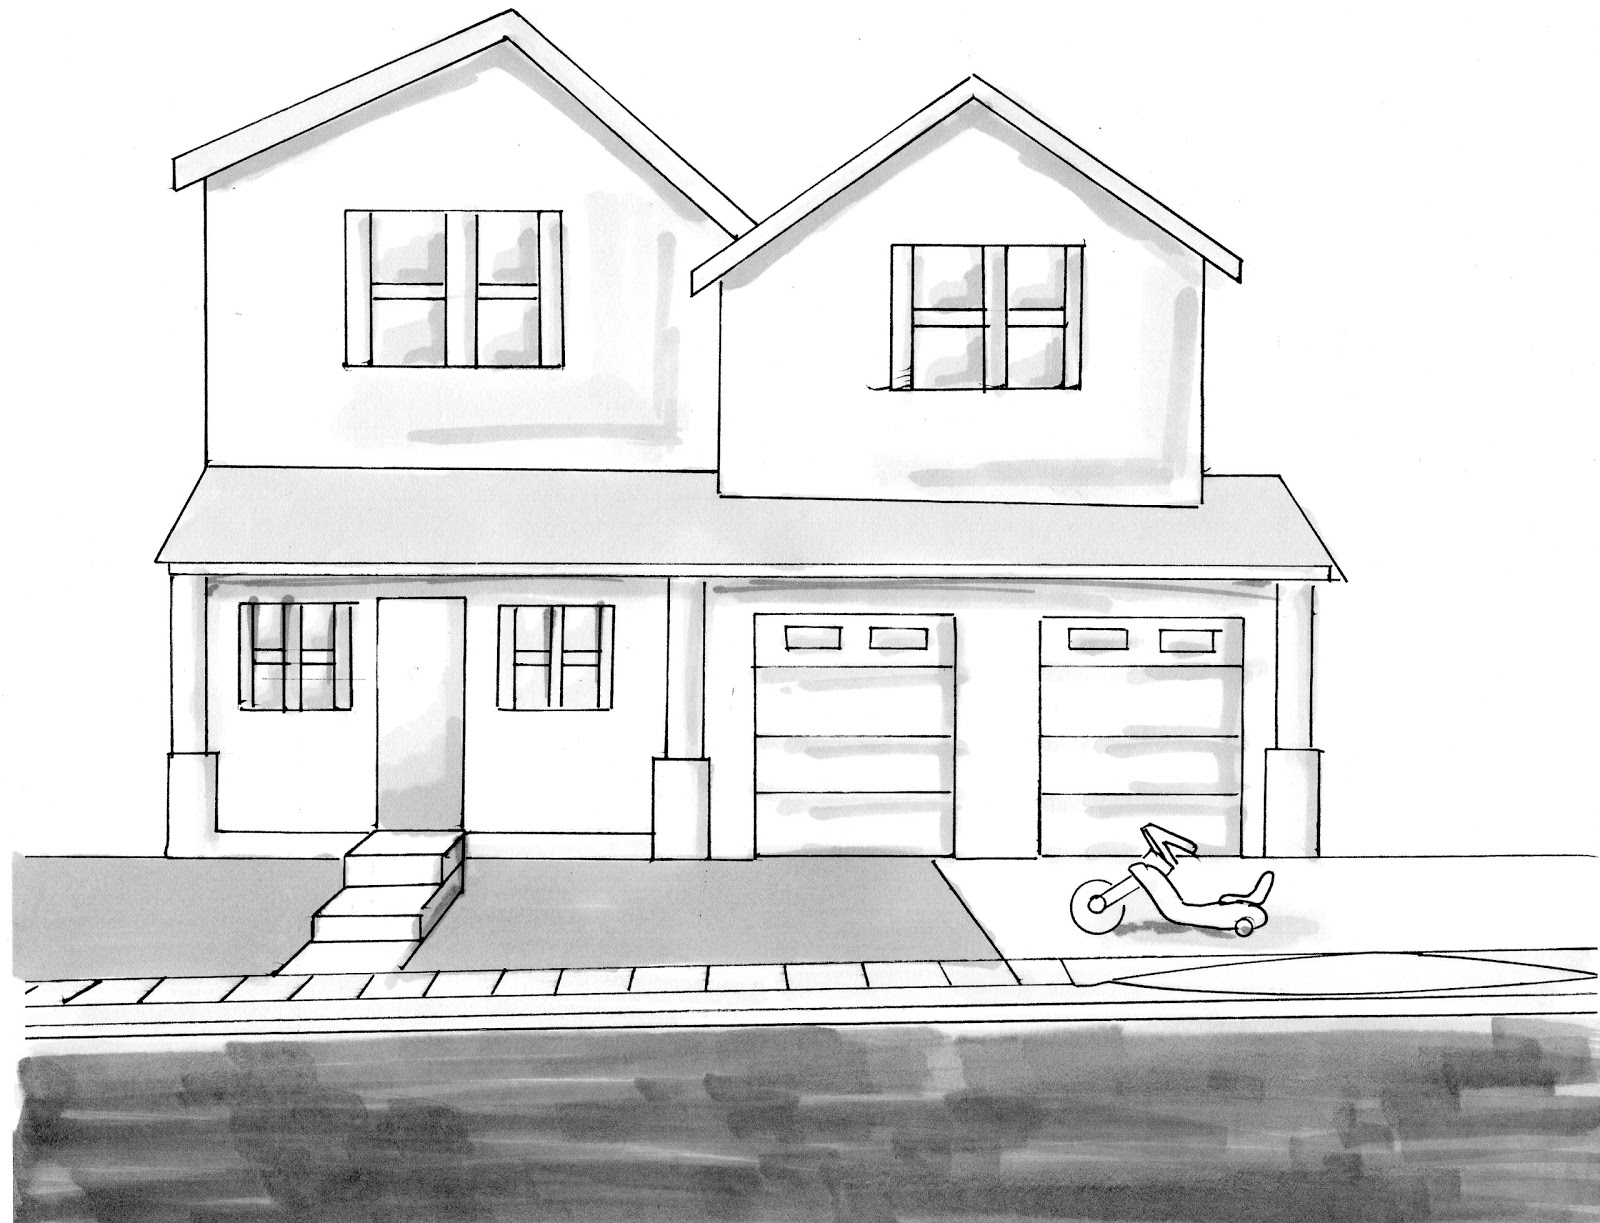 Simple house sketch drawing - omeganibht